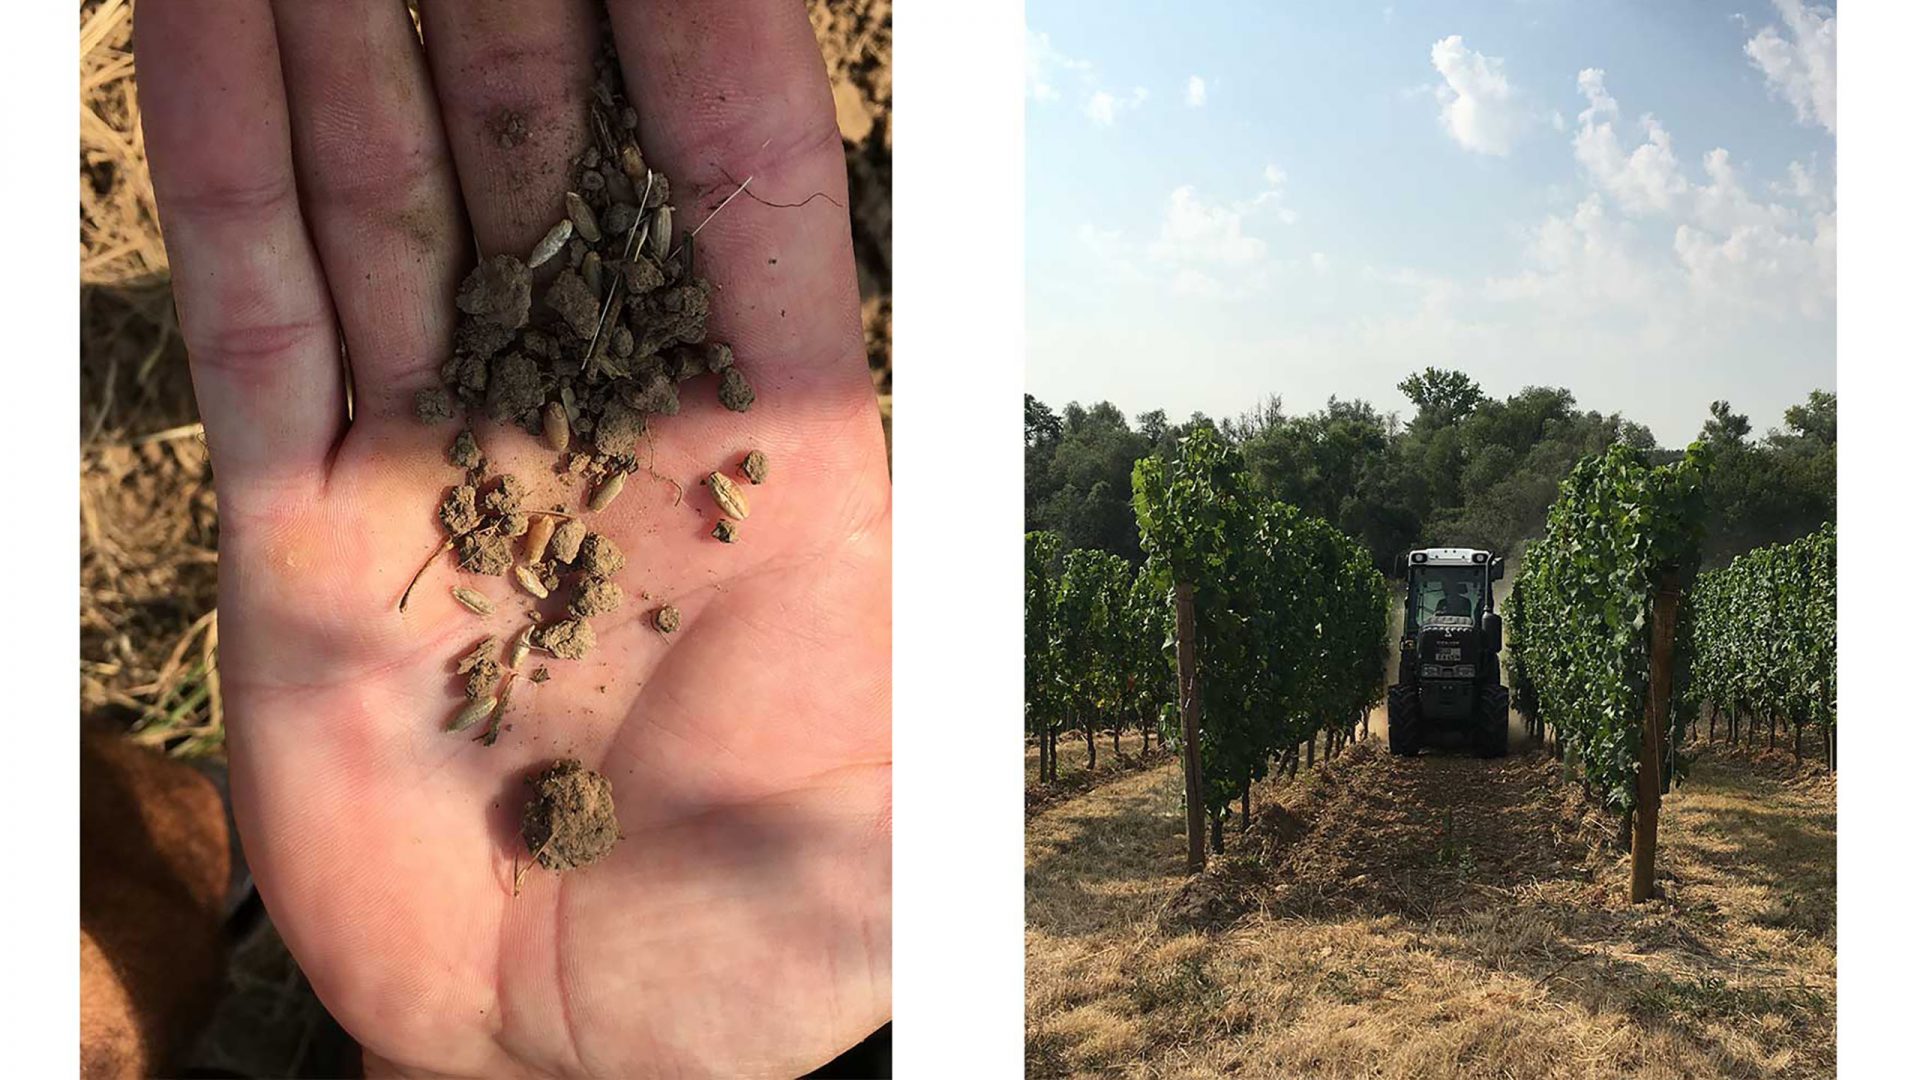 Left: hand with dry earth. Right: a tracker between rows of vines